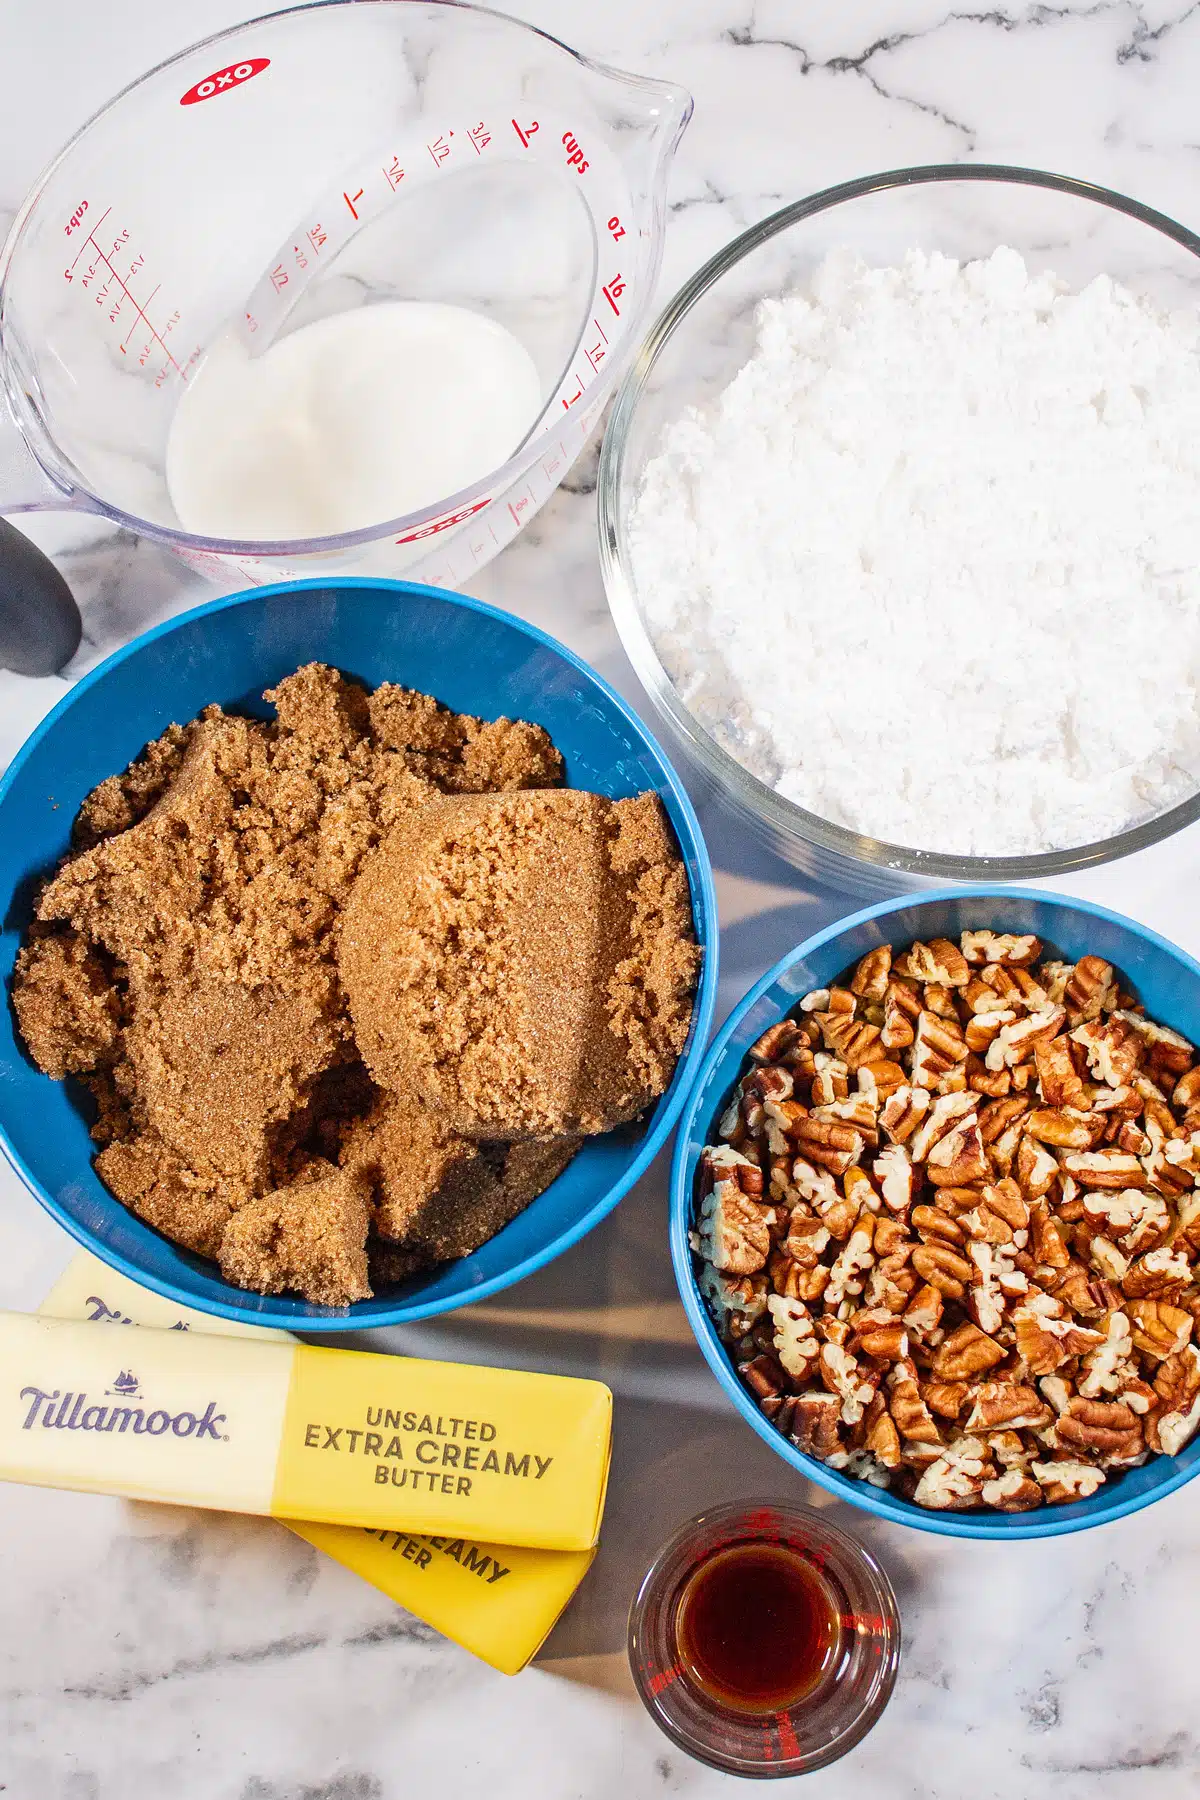 Mexican Pralines ingredients measured out and ready to make this tasty pecan candy.